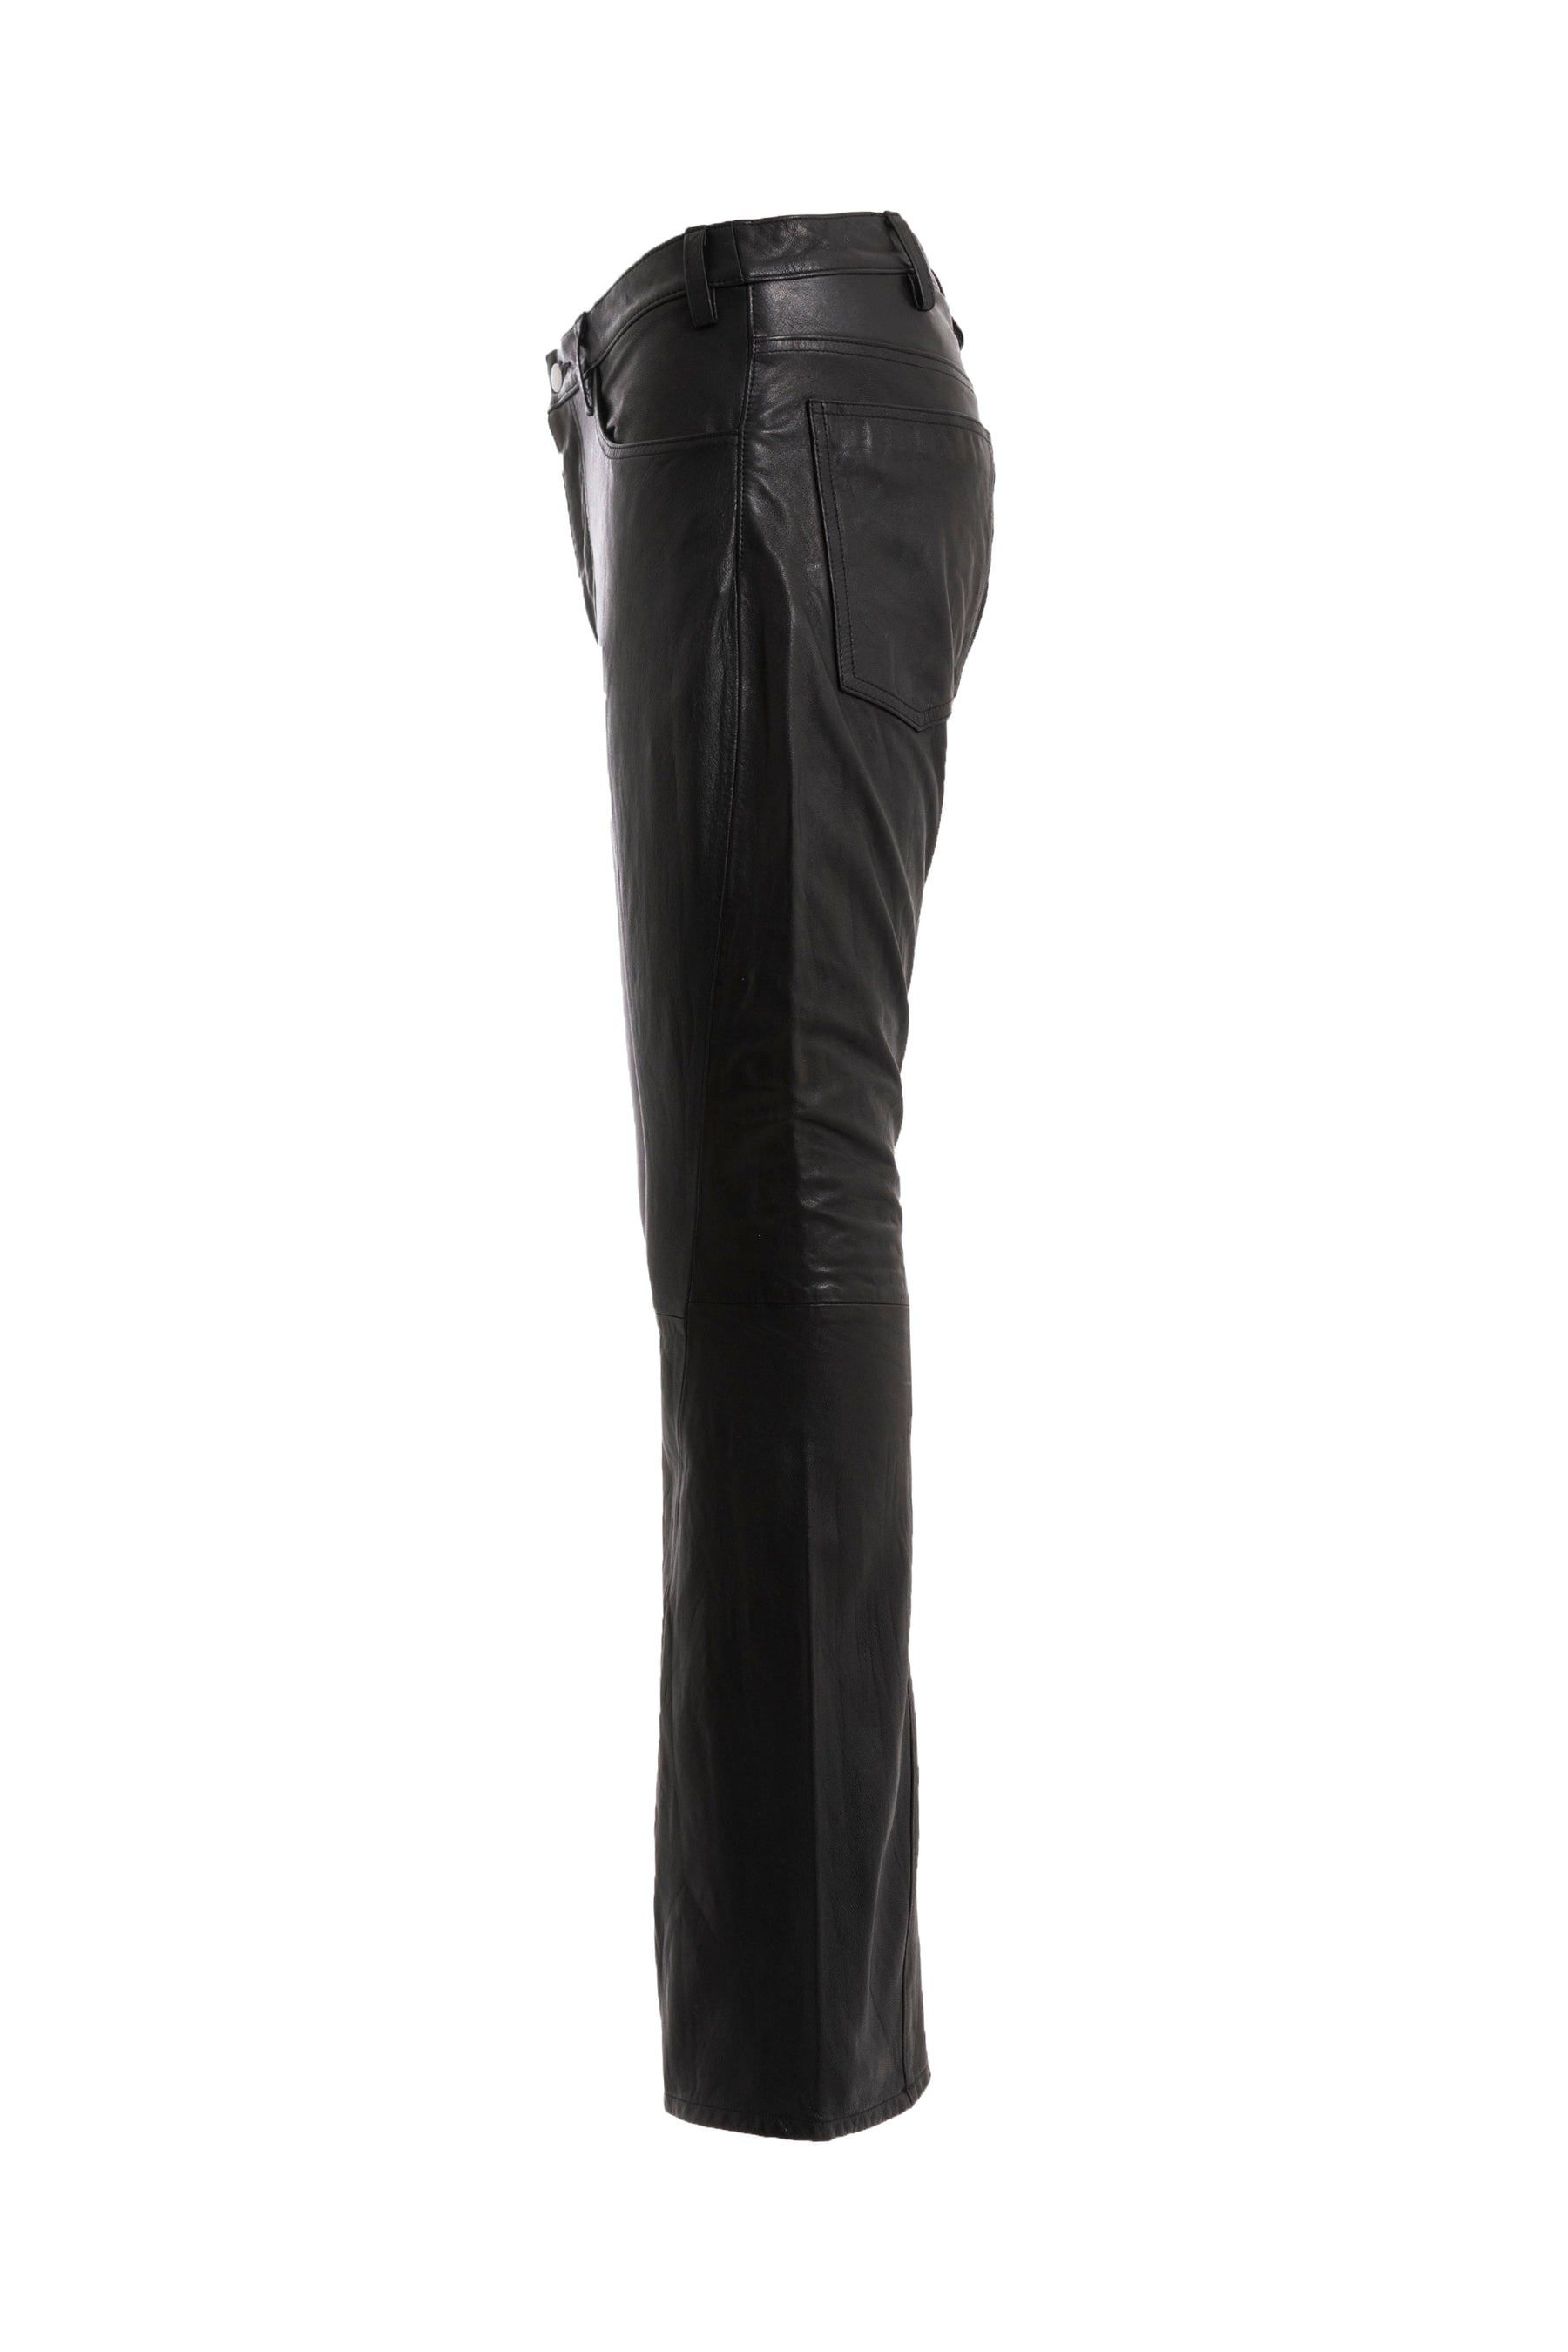 #146 LEATHER TROUSERS 2.0 / BLK